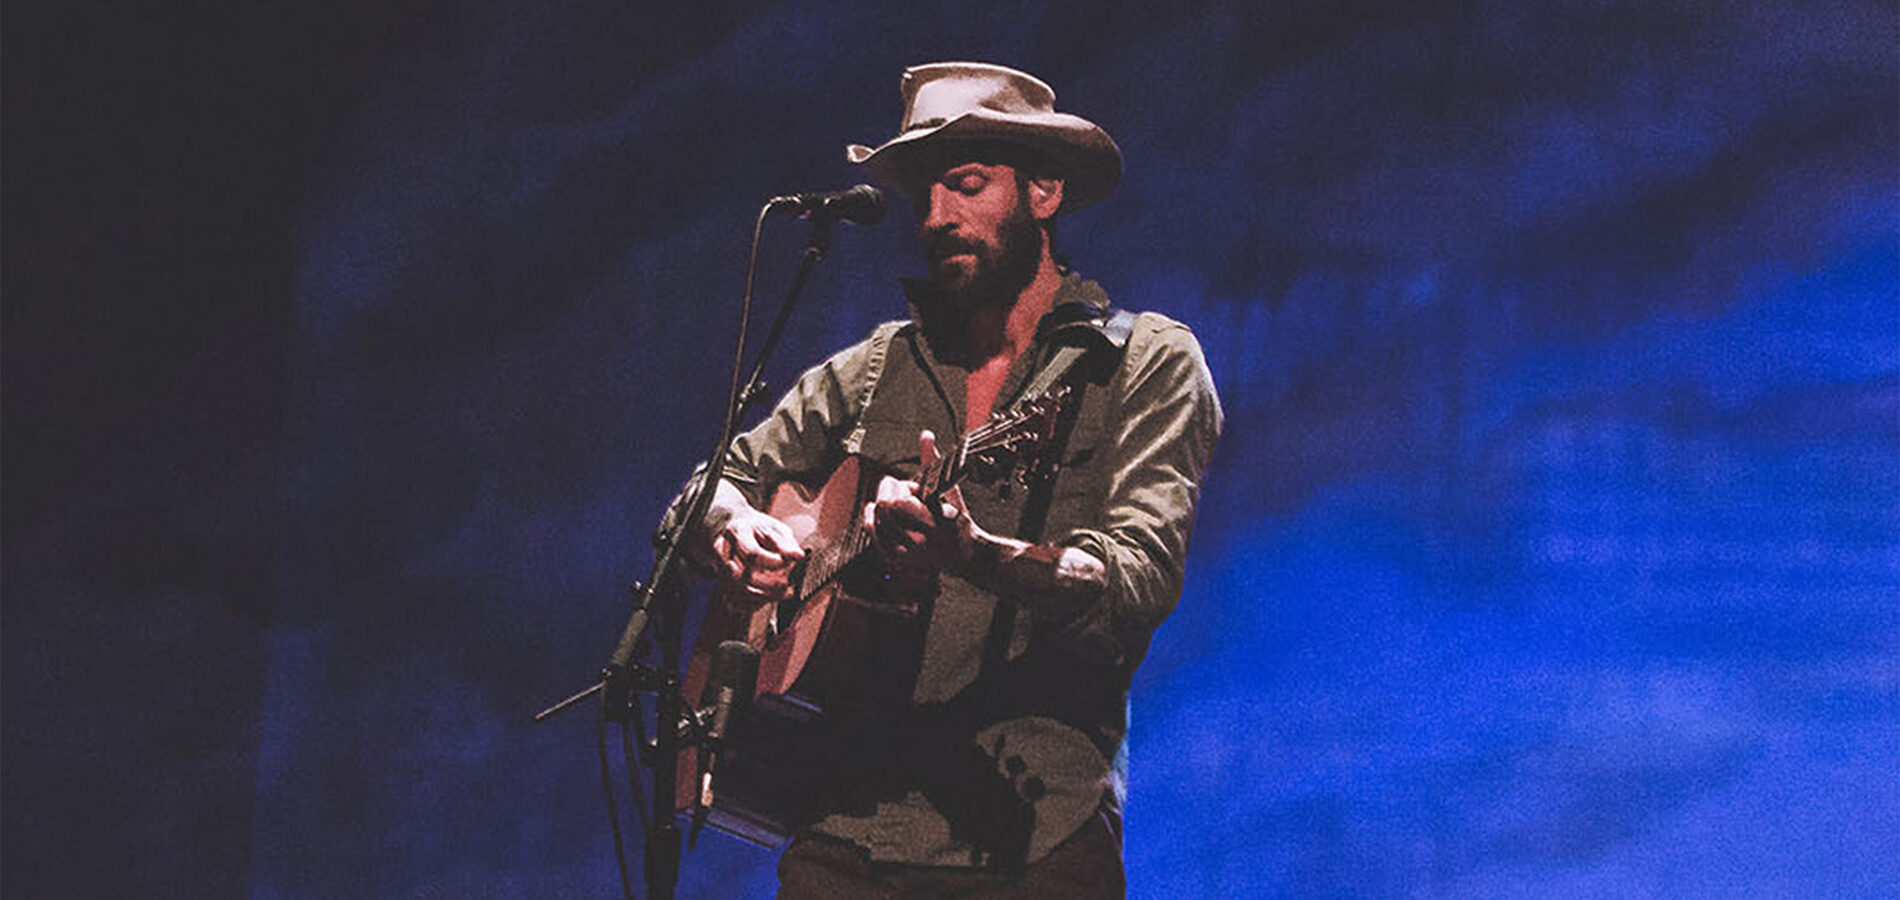 WXPN Welcomes Ray LaMontagne